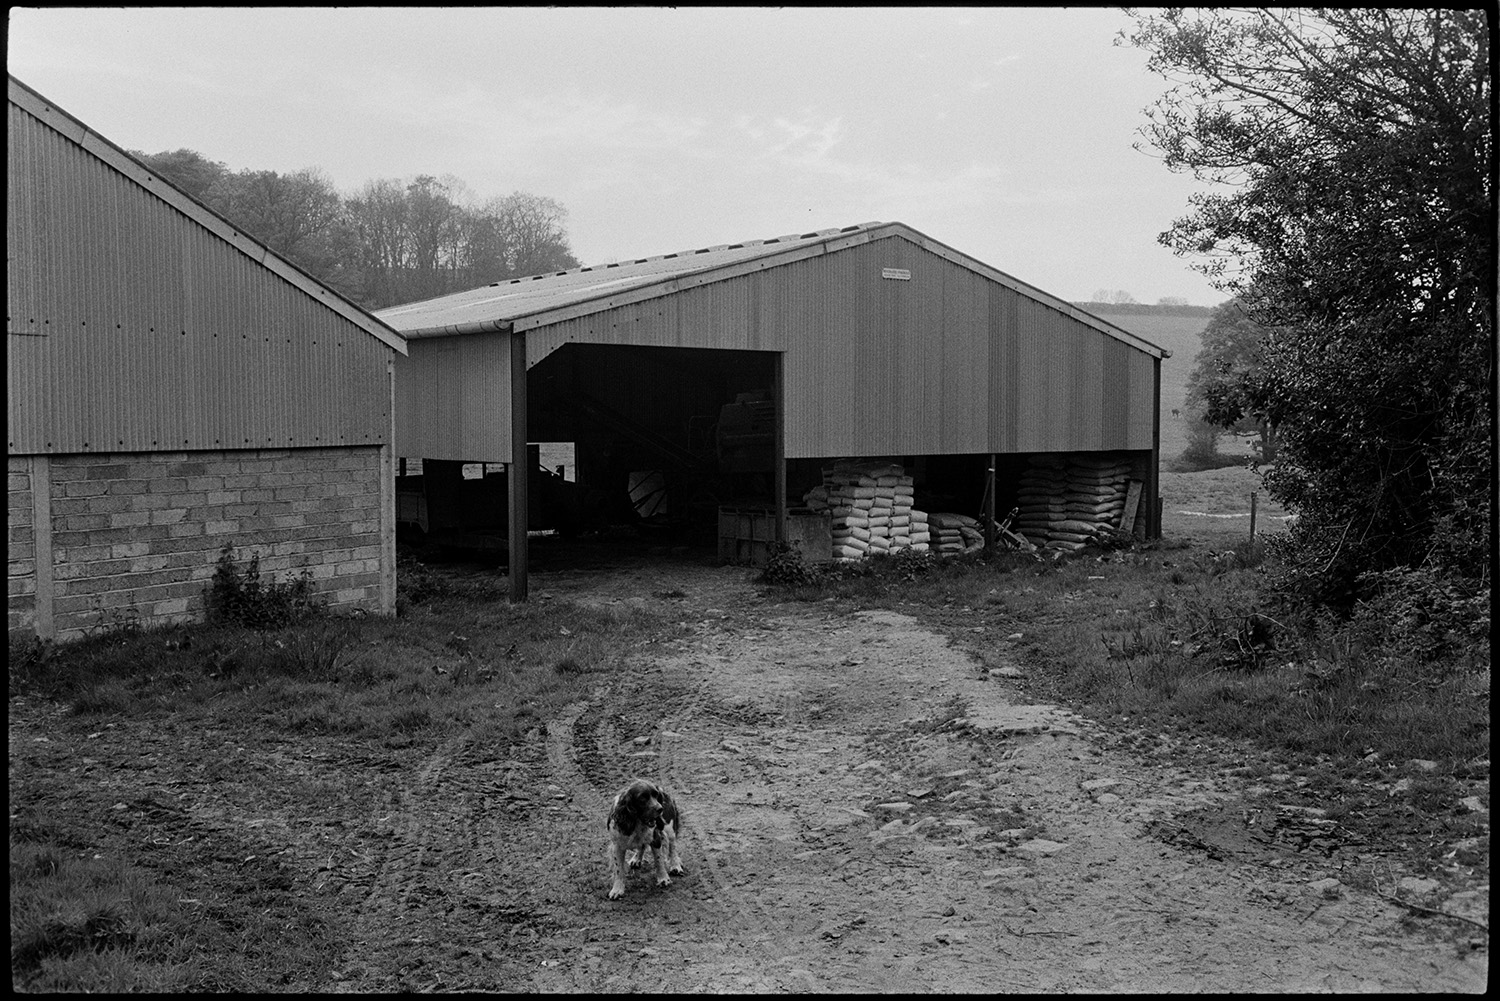 Modern barn with tractor.
[A dog standing in a muddy farmyard in front of a corrugated iron barn. Sacks can be seen stacked in the barn.]